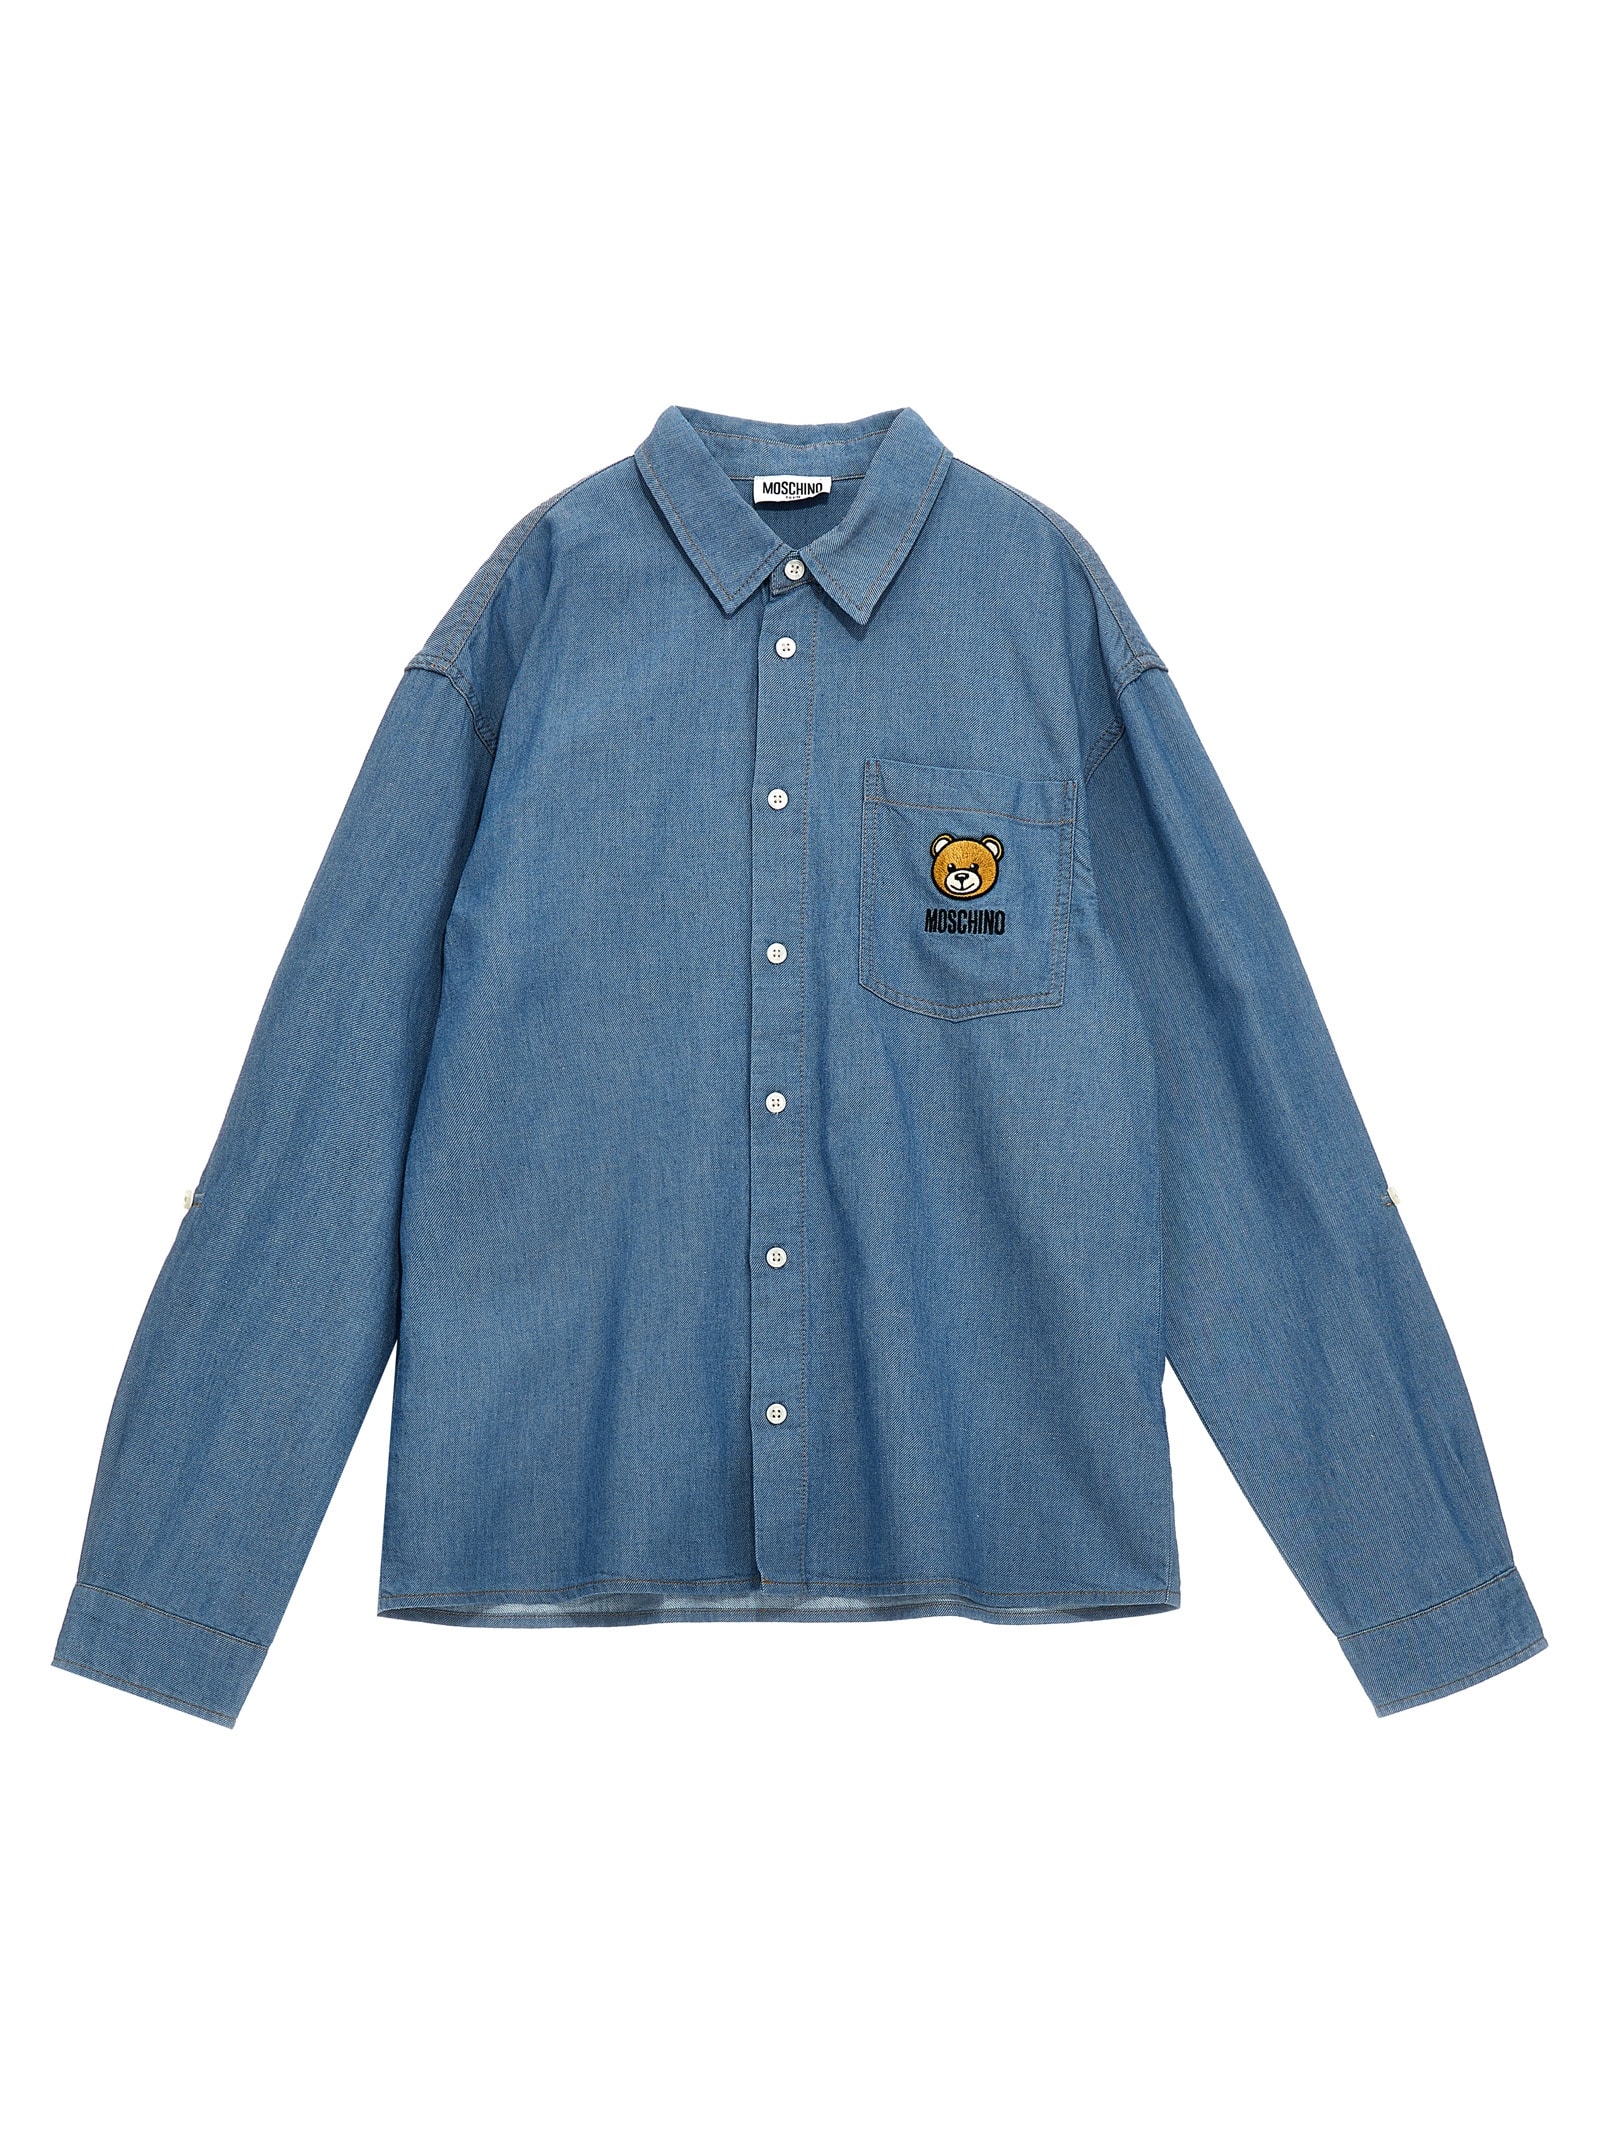 Moschino Kids' Logo Embroidery Shirt In Light Blue